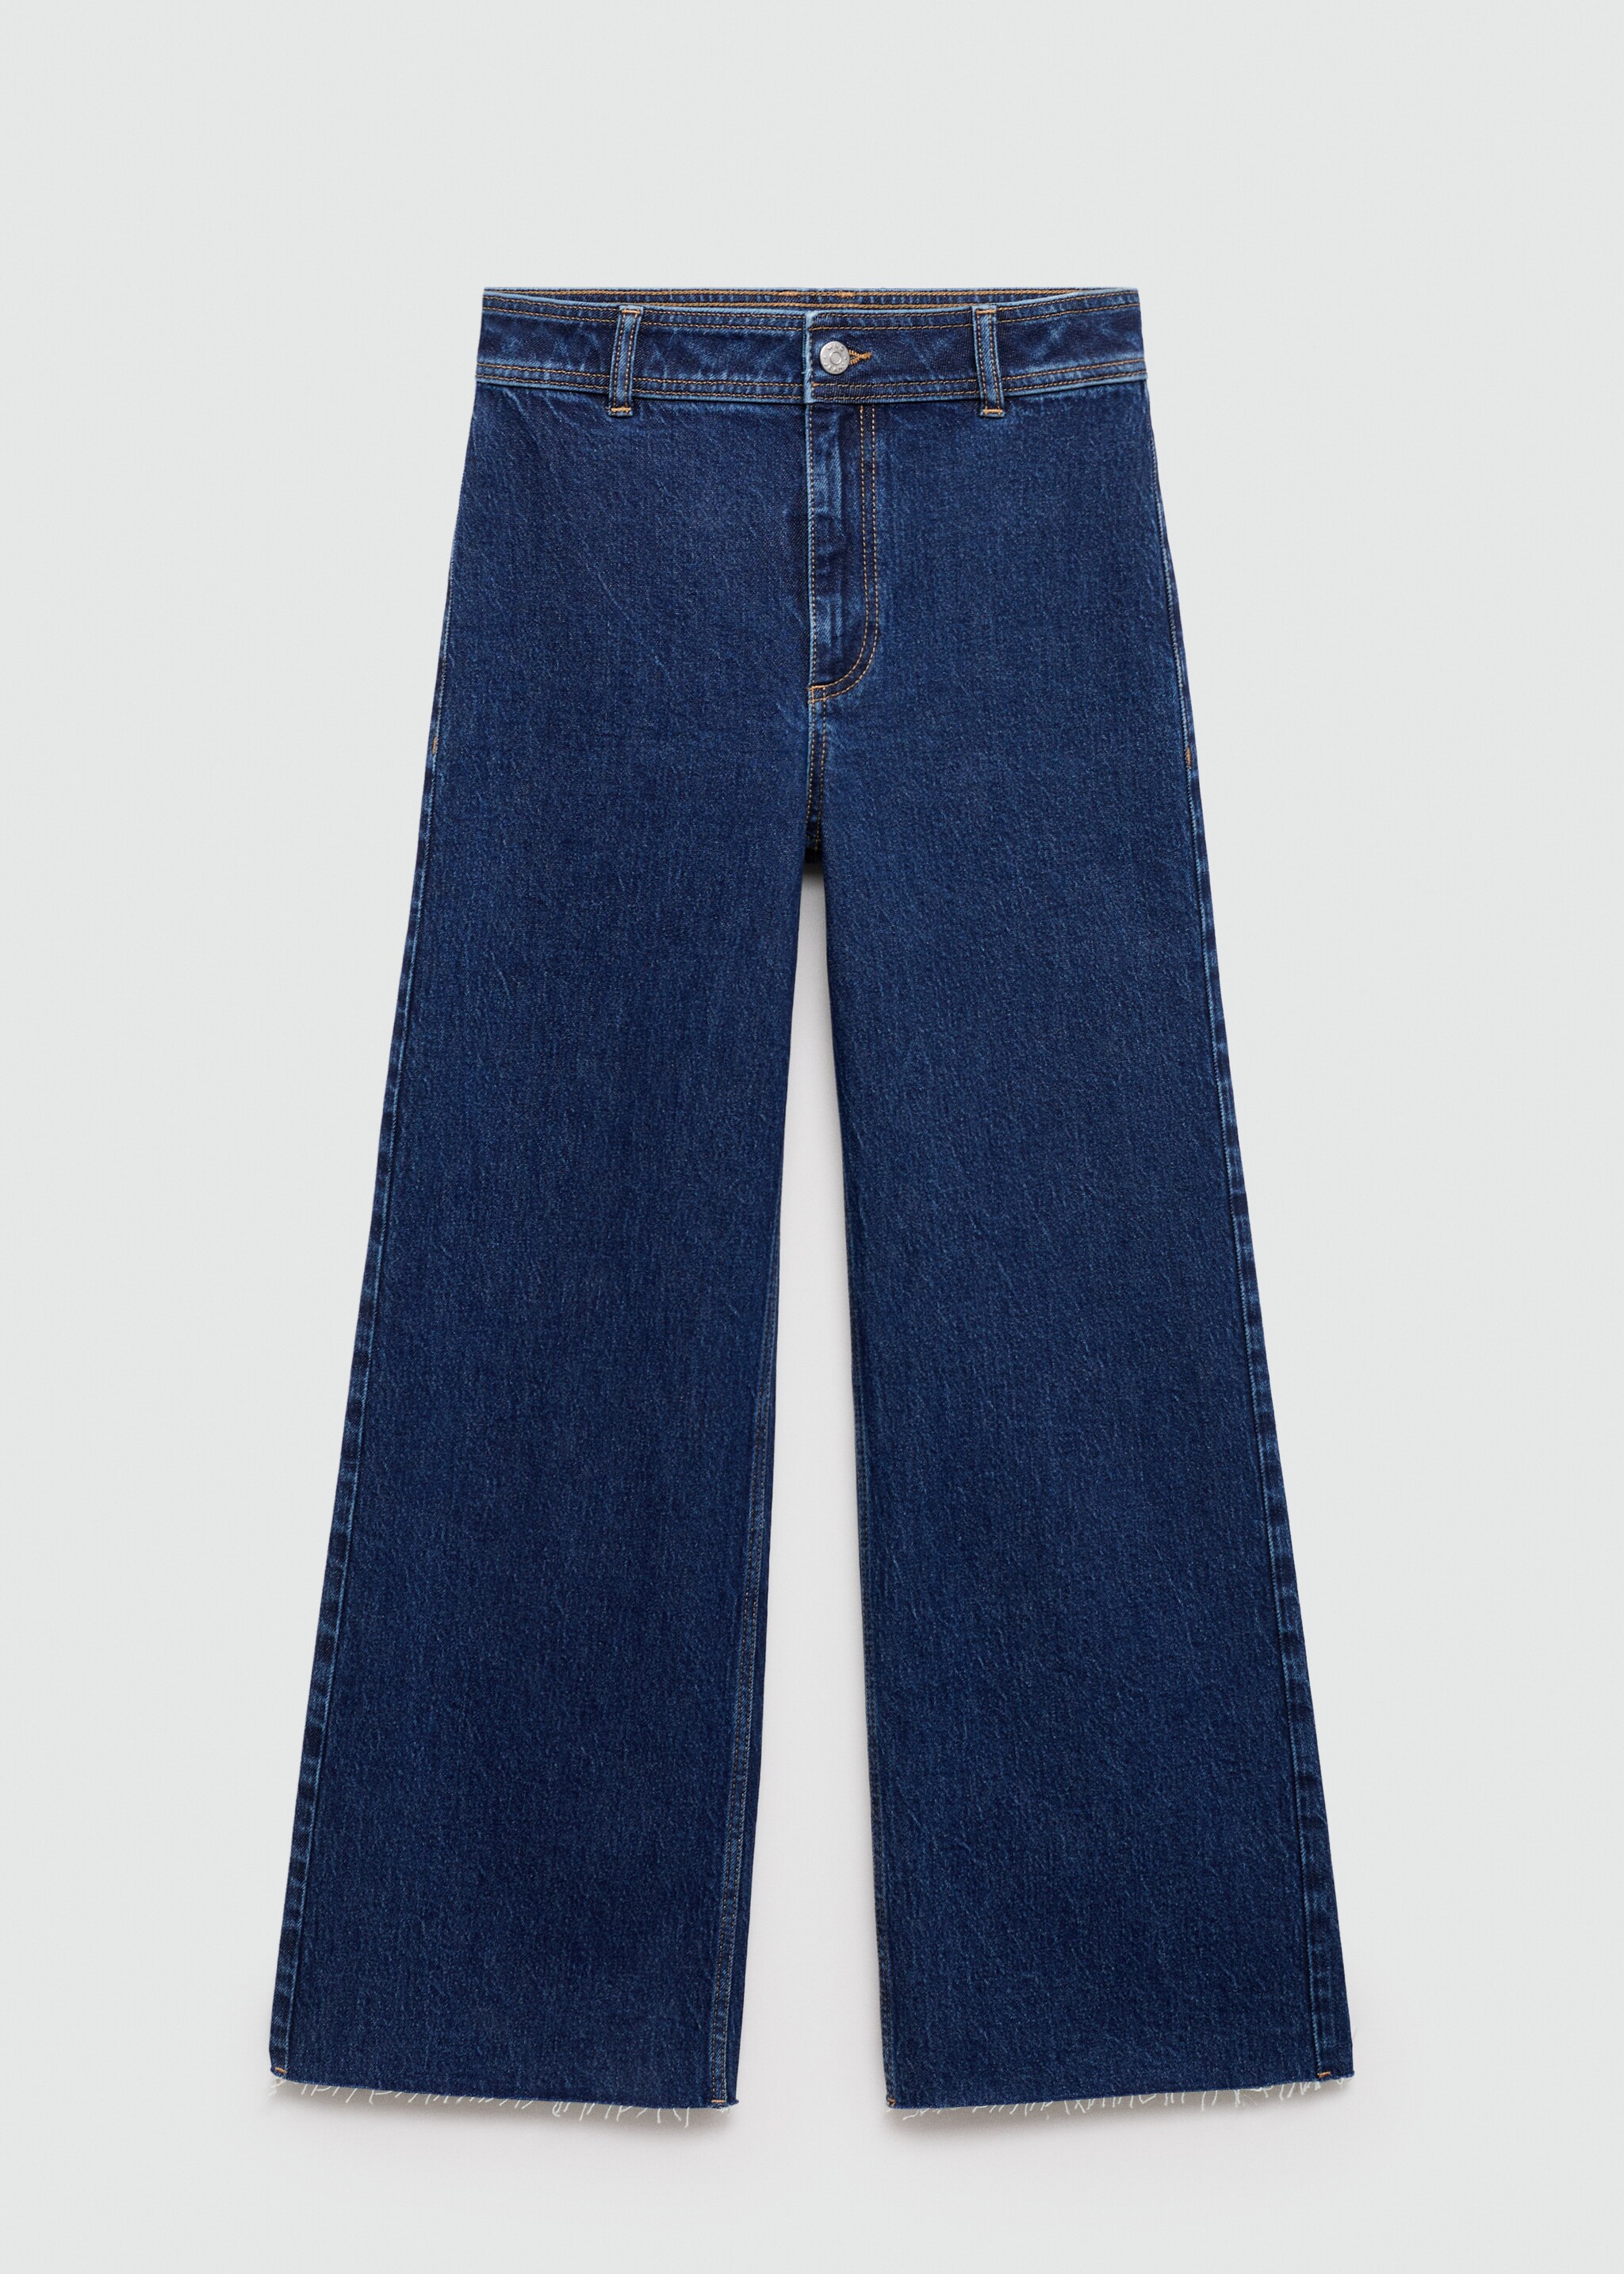 Catherin high-rise culotte jeans - Article without model